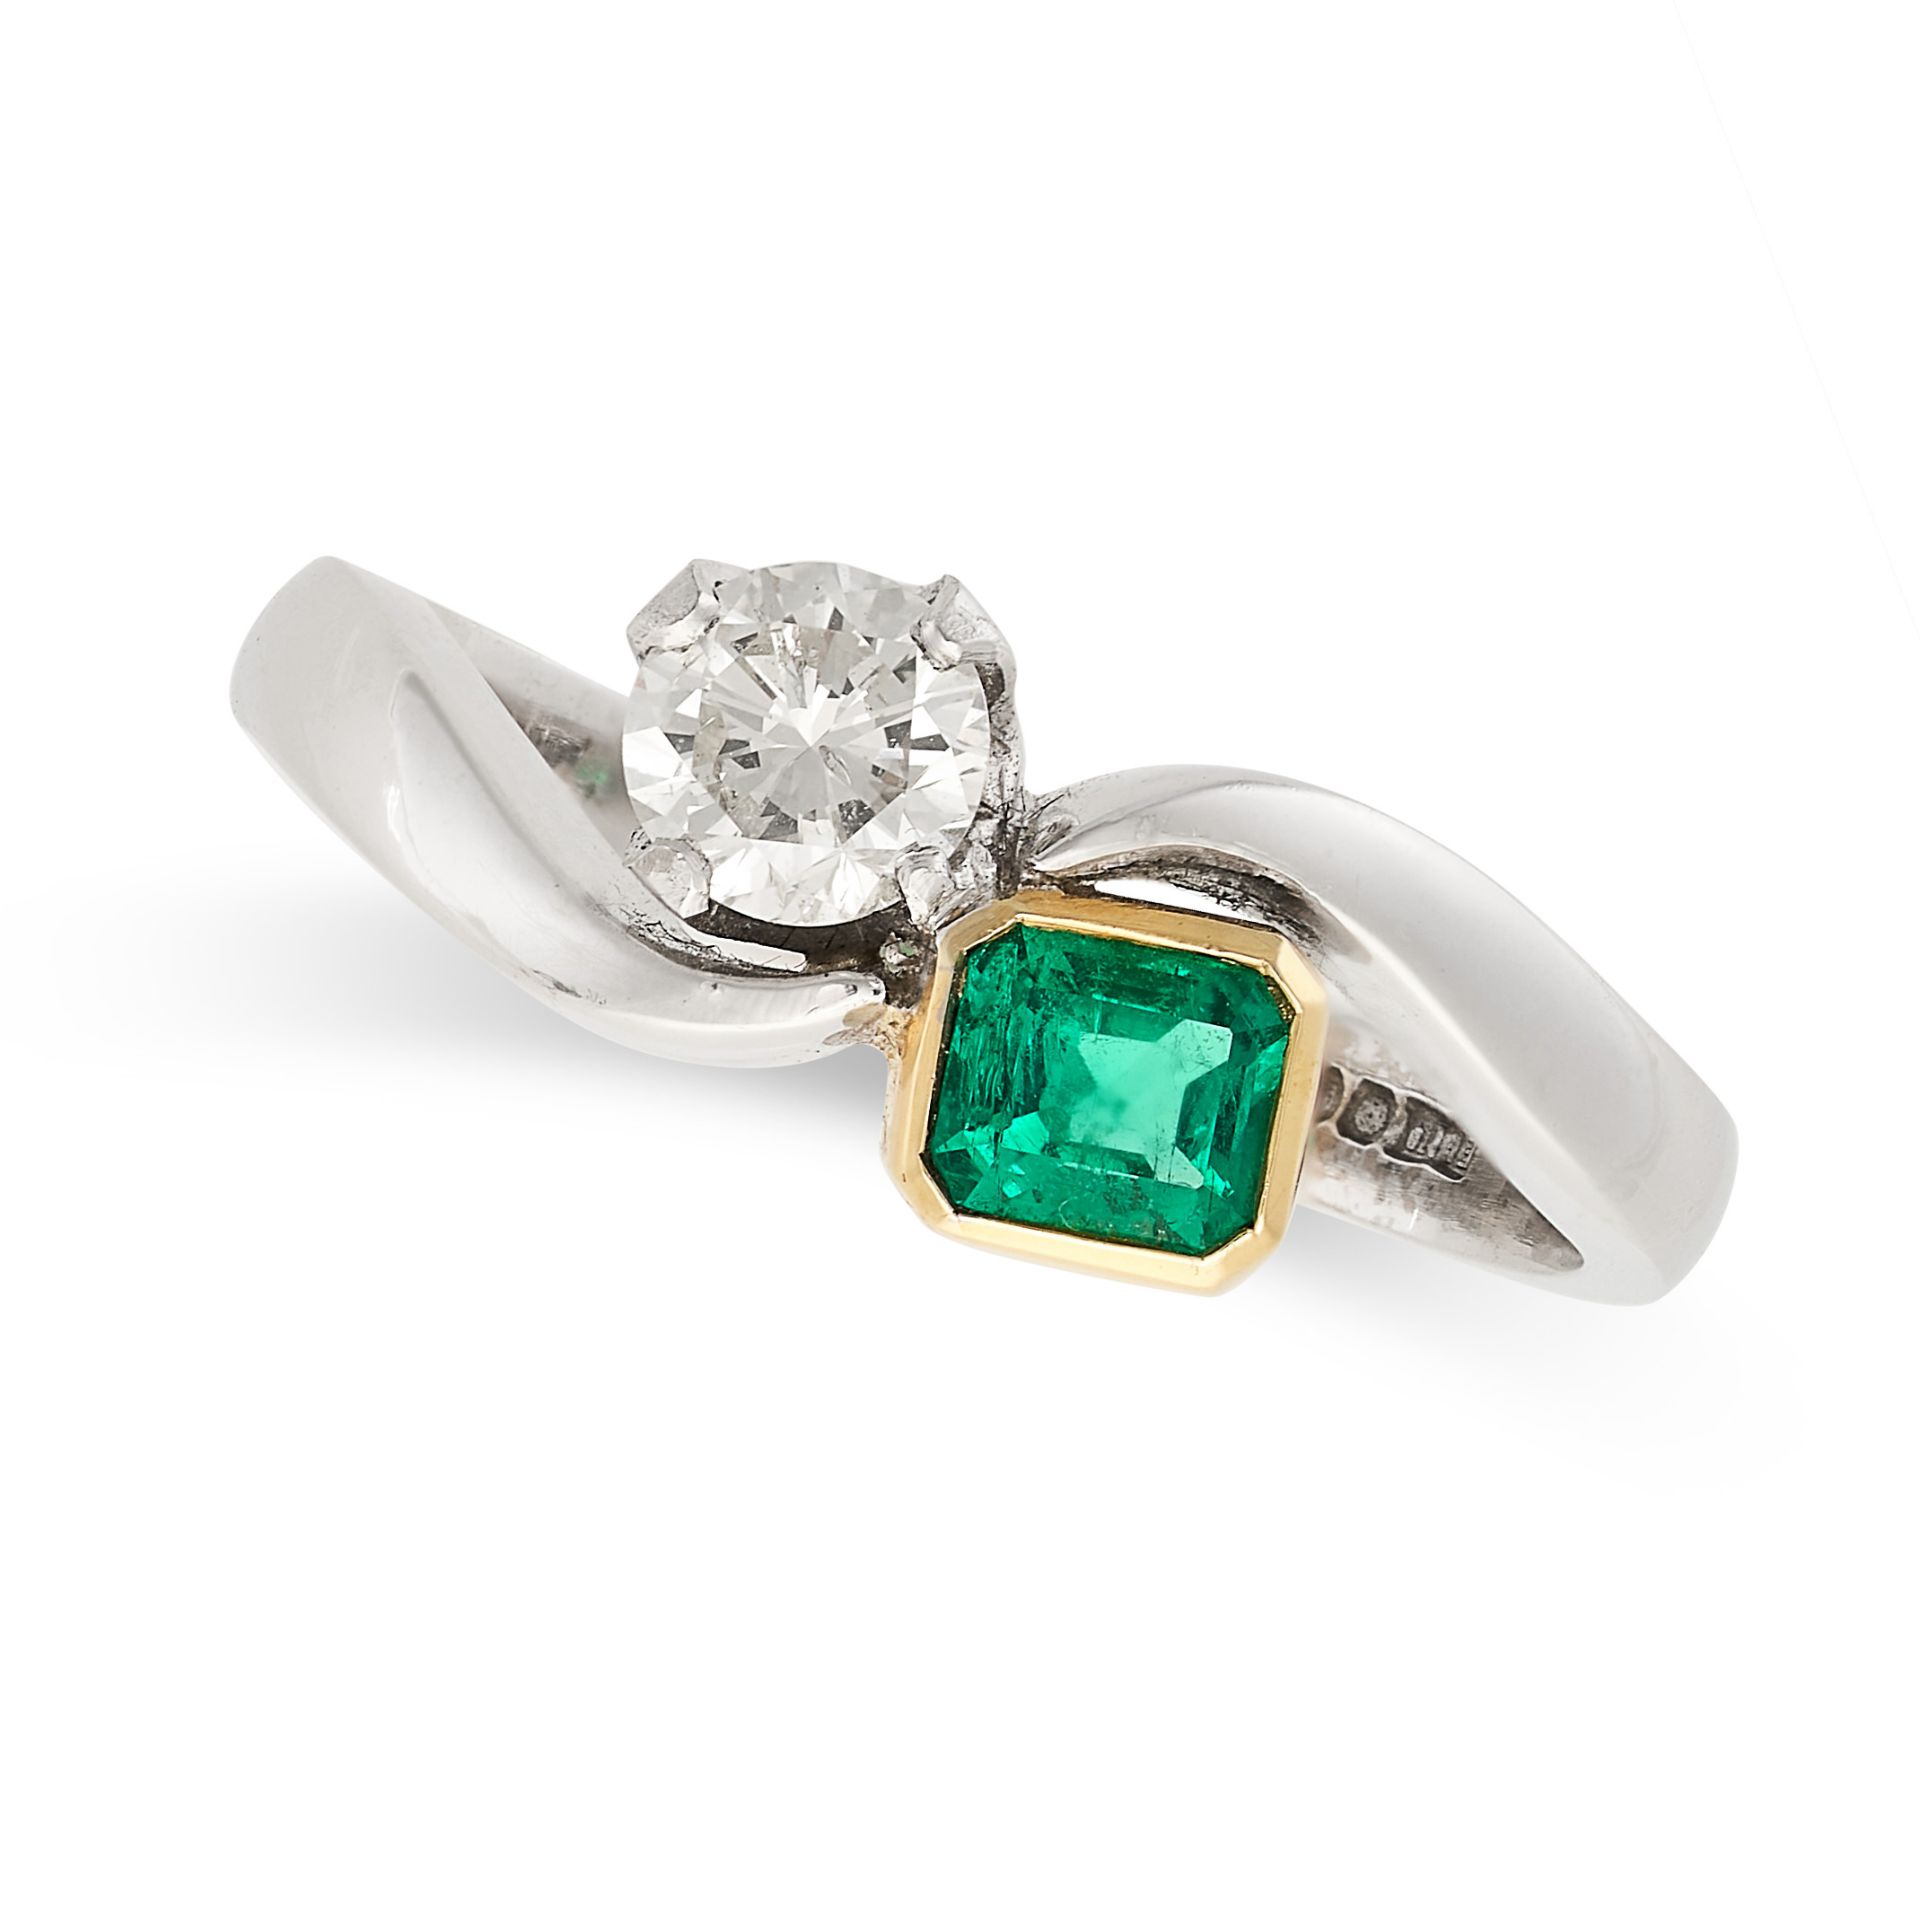 A VINTAGE EMERALD AND DIAMOND TOI ET MOI RING in 18ct white gold and yellow gold, set with an